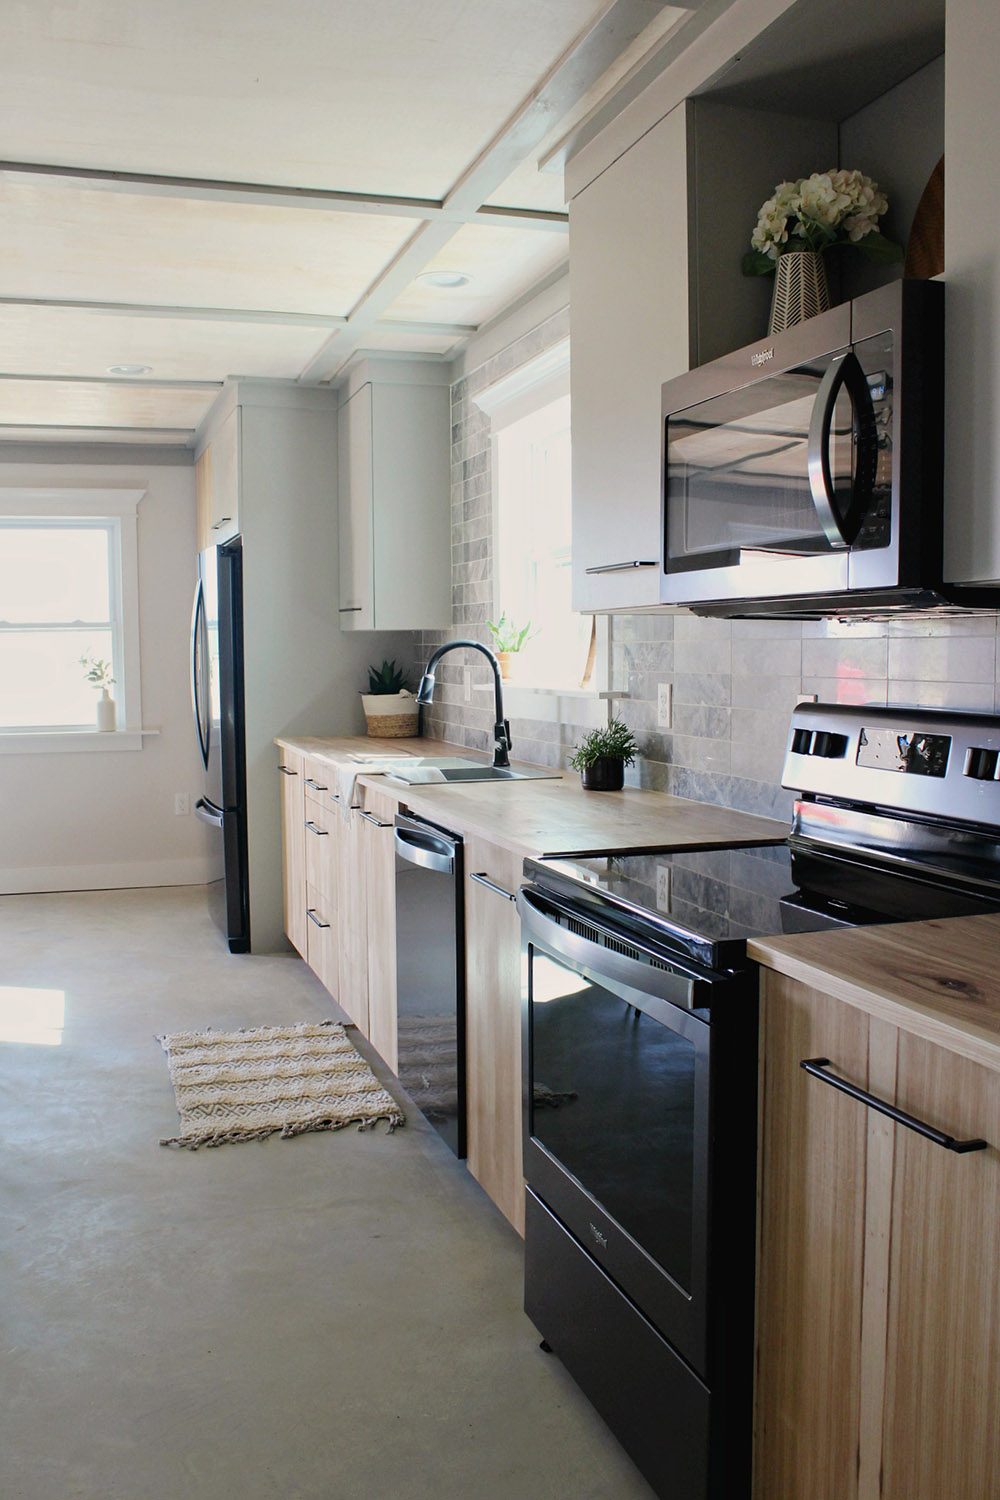 How to Design a Kitchen Space With Appliances in Mind